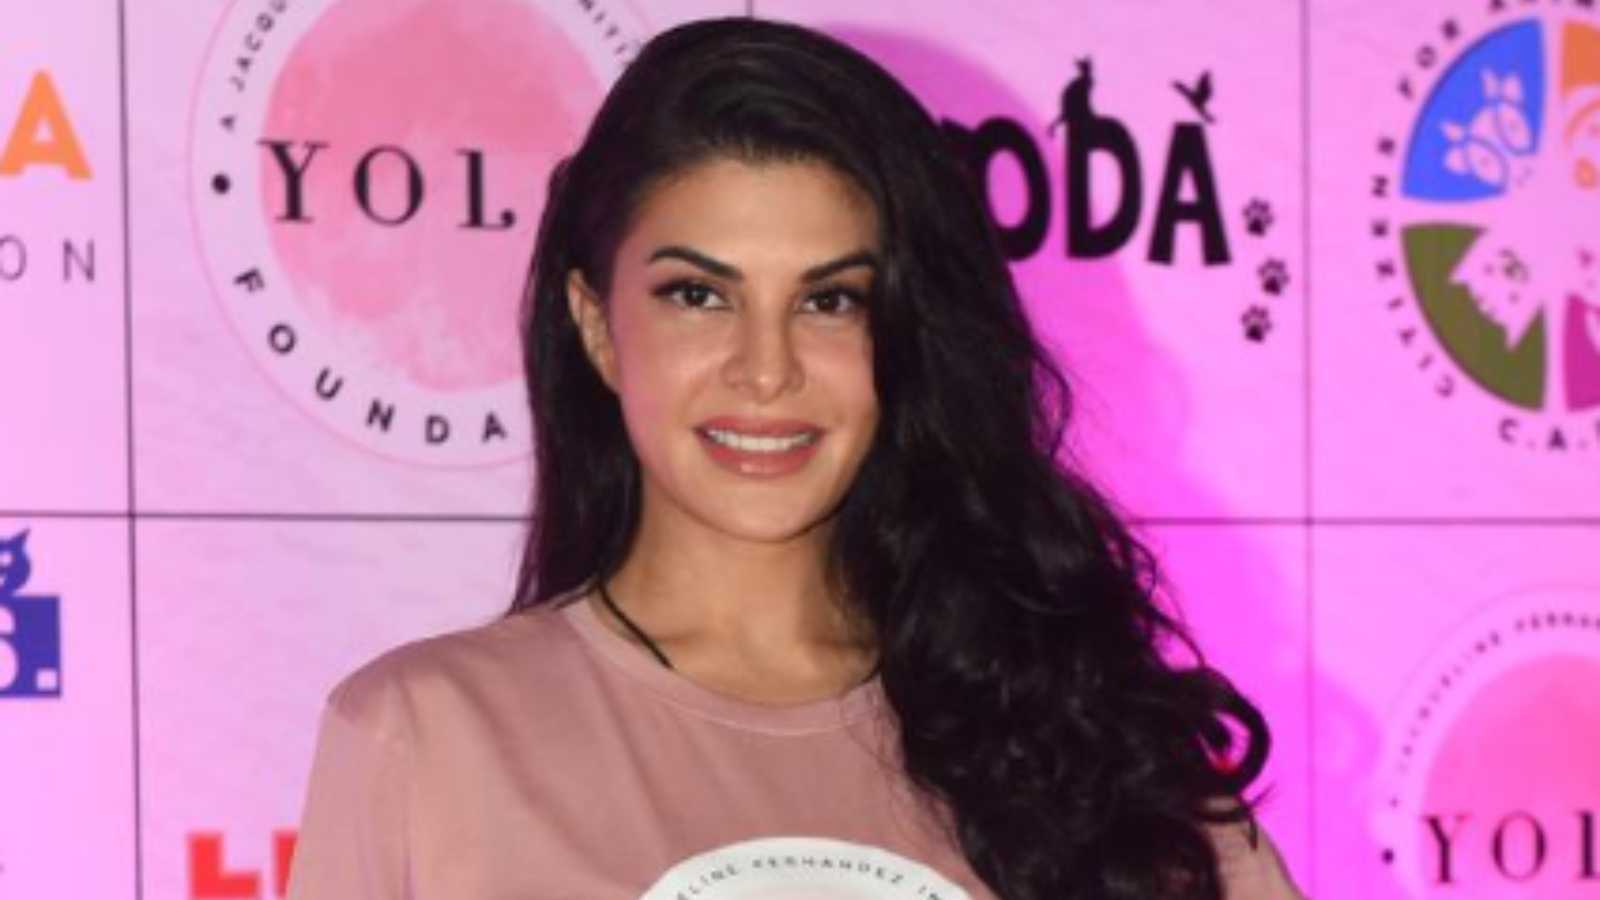 Jacqueline Fernandez’s YOLO foundation comes to aid stray animals with sterilisation and adoption